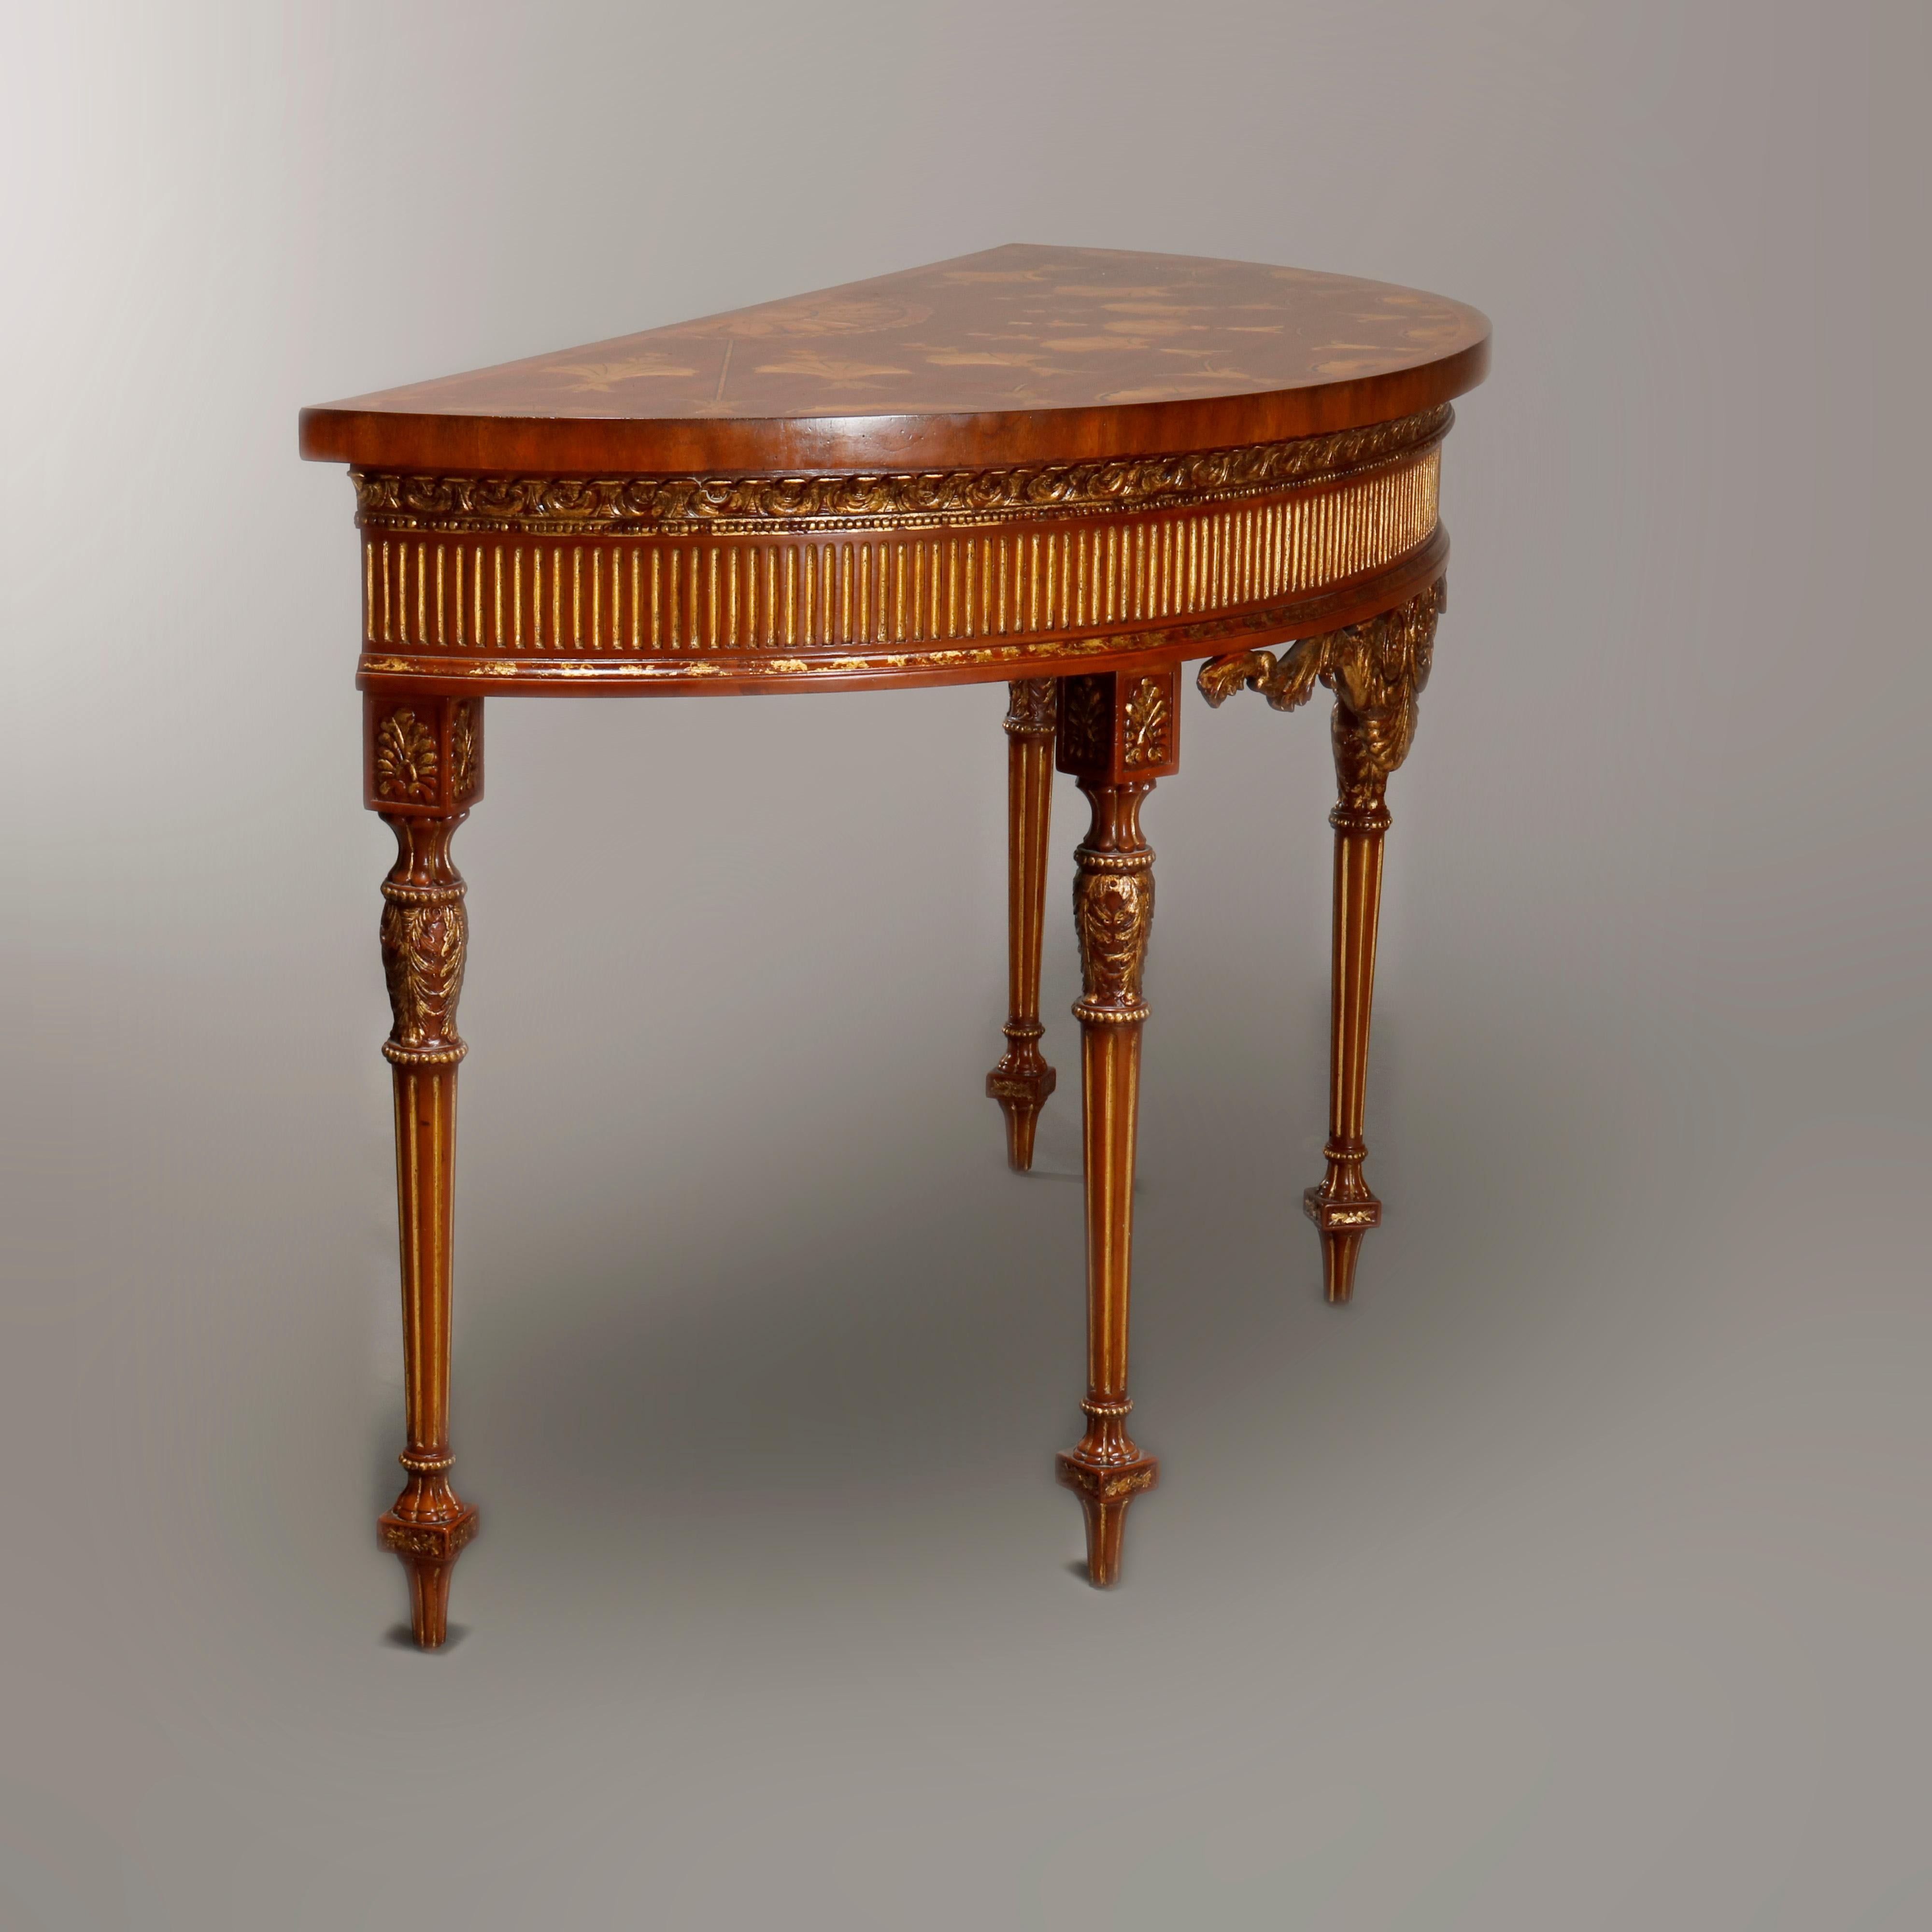 Maitland Smith Parcel Gilt Mahogany & Satinwood Marquetry Demilune Console Table For Sale 10